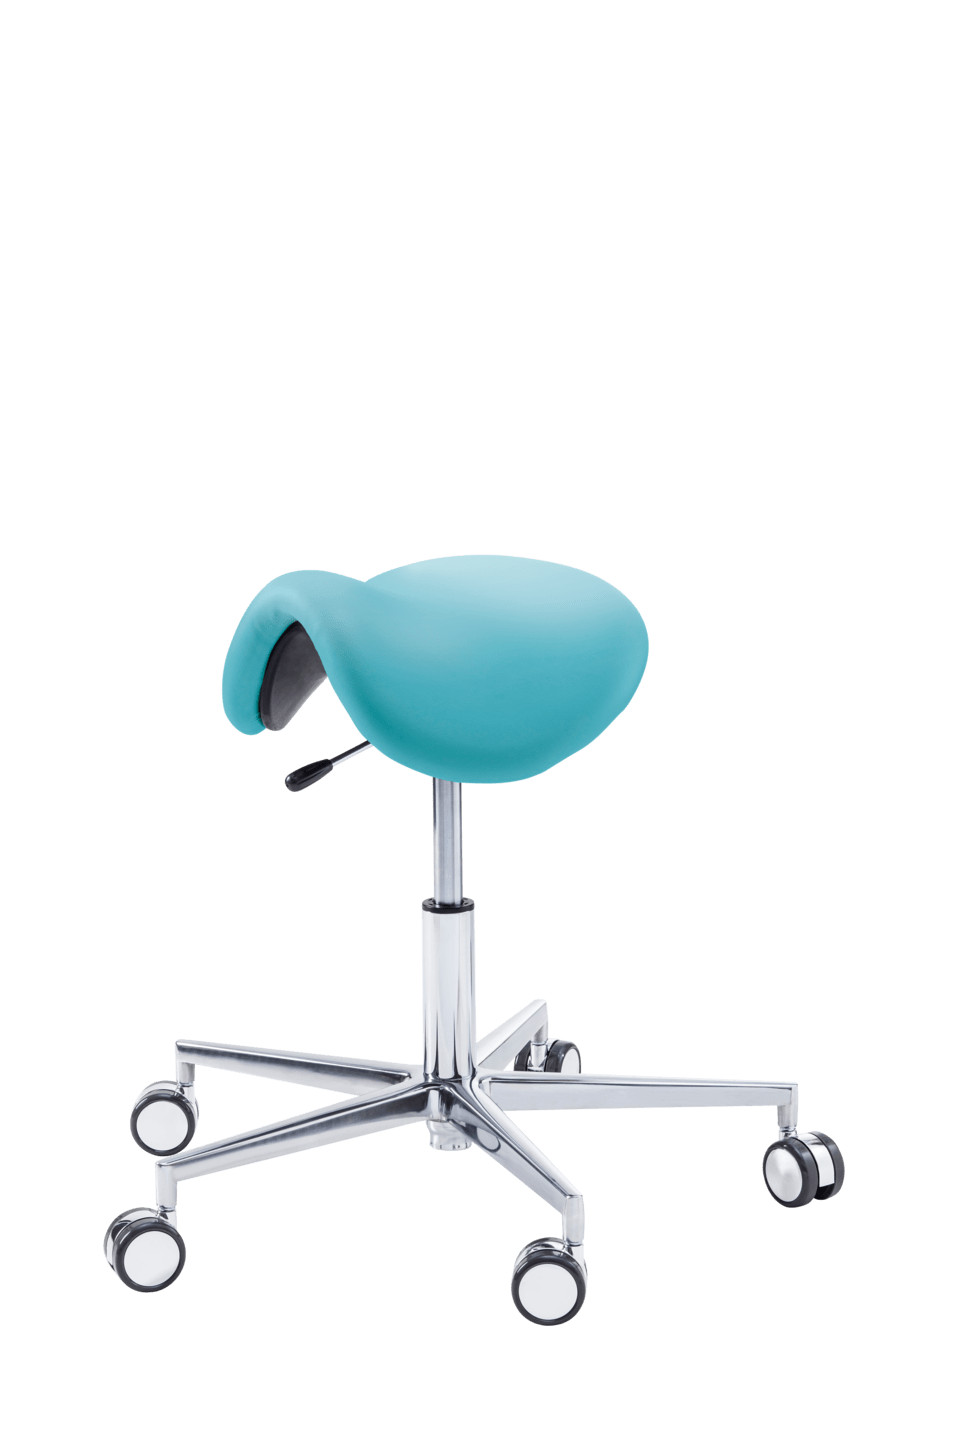 RUCK - STOOL saddle in mint